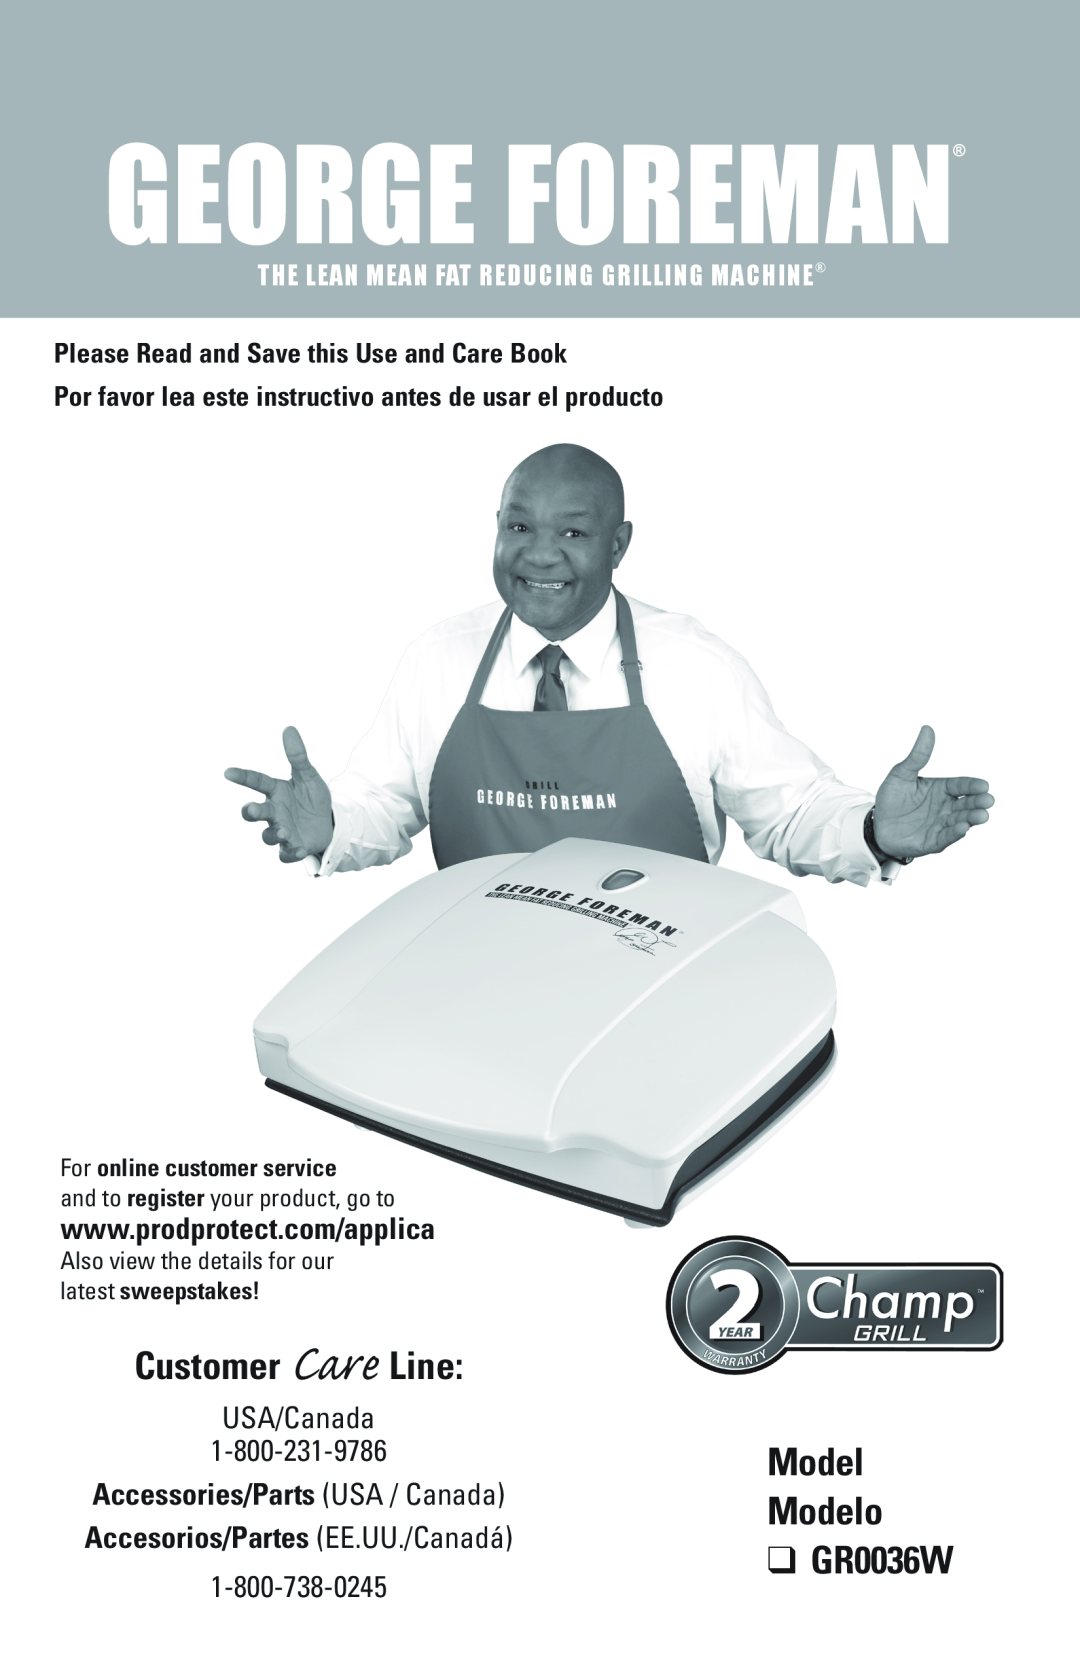 George Foreman manual Customer Care Line, Model Modelo GR0036W, The Lean Mean Fat Reducing Grilling Machine 